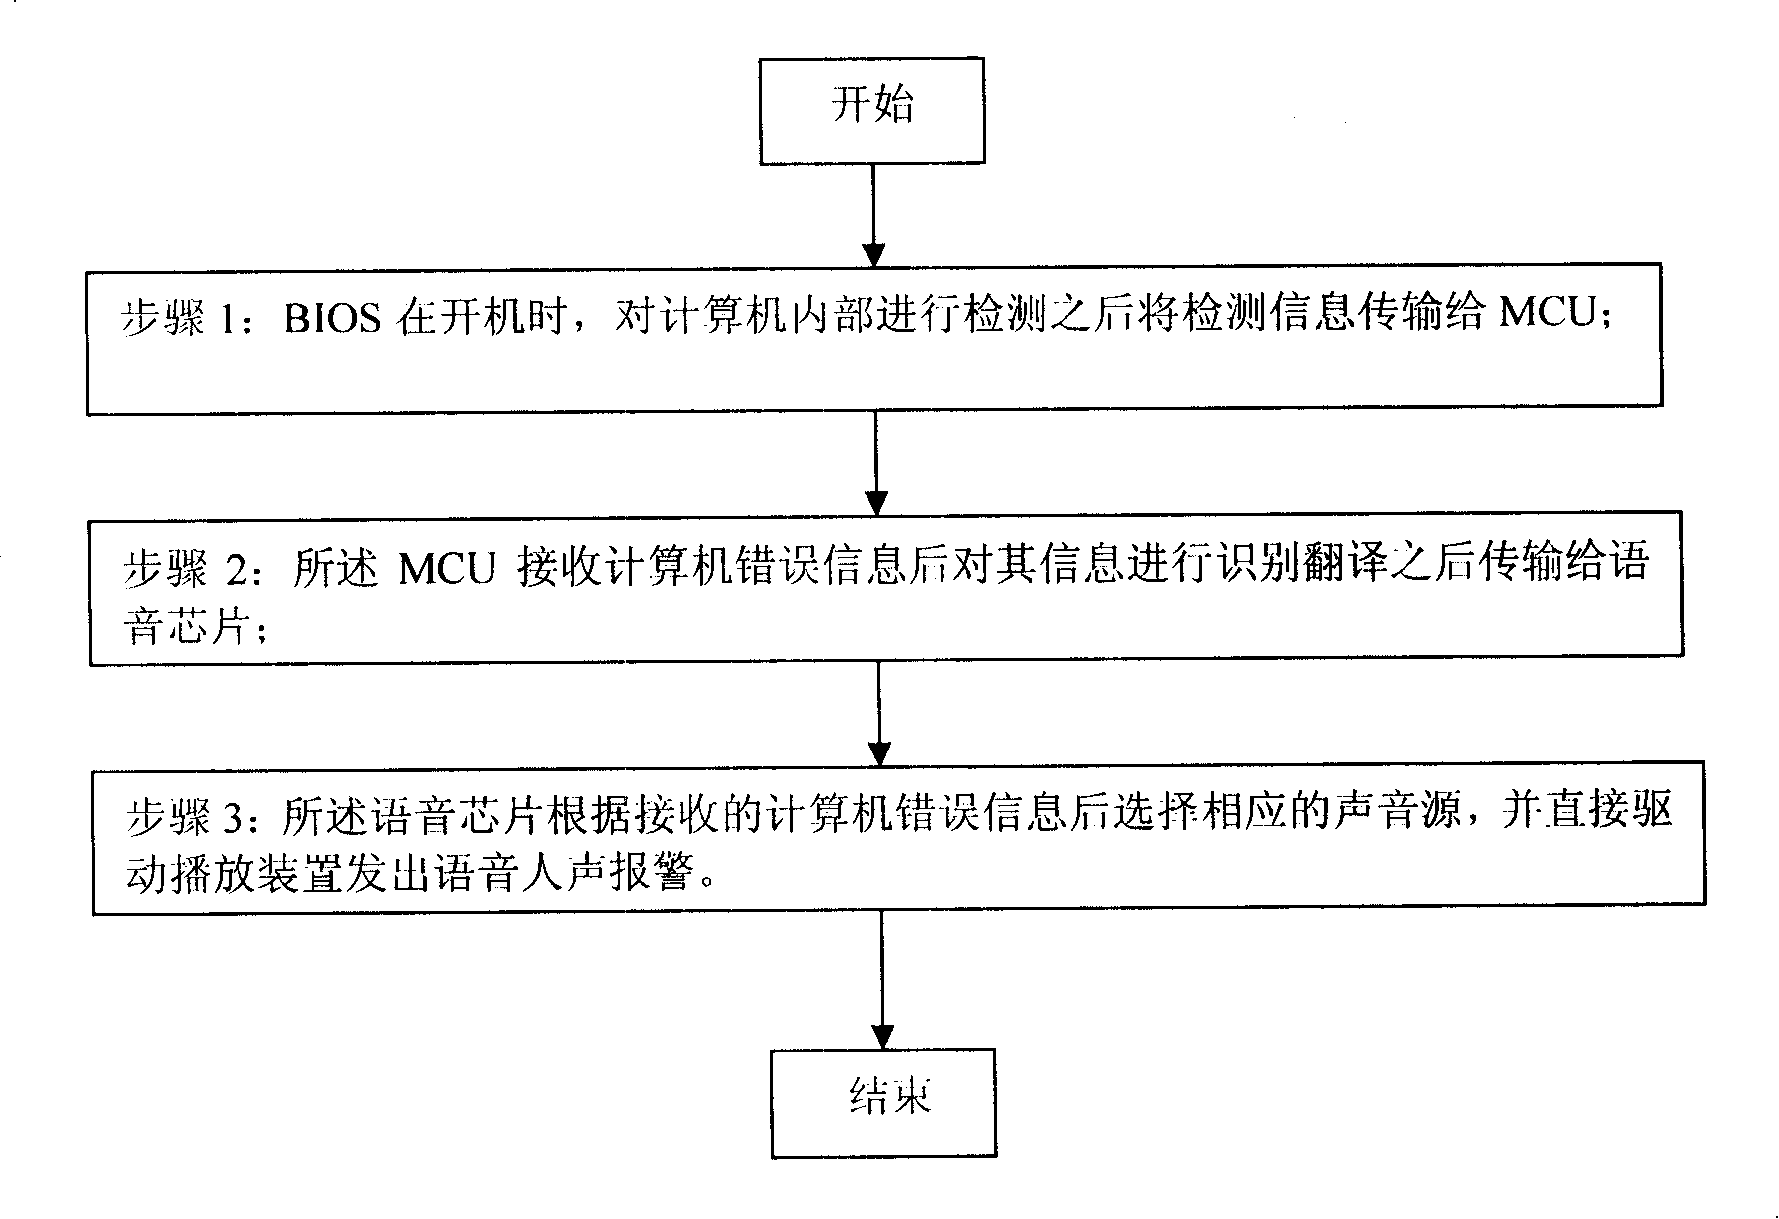 Computer fault alarm system and method